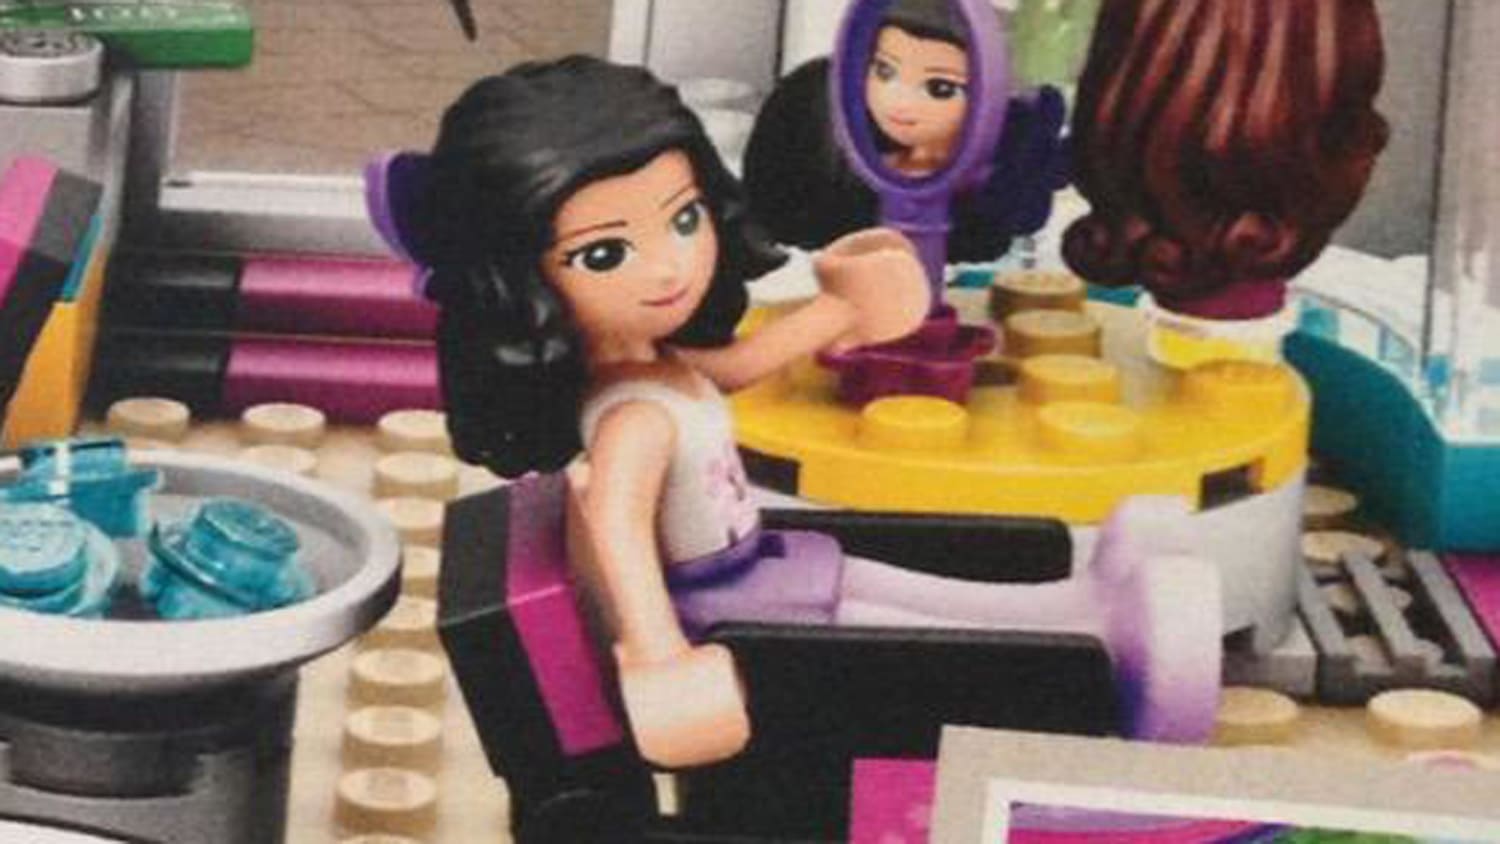 Knogle klar servitrice Lego magazine offers 'Beauty Tips' to young girls, stirring controversy